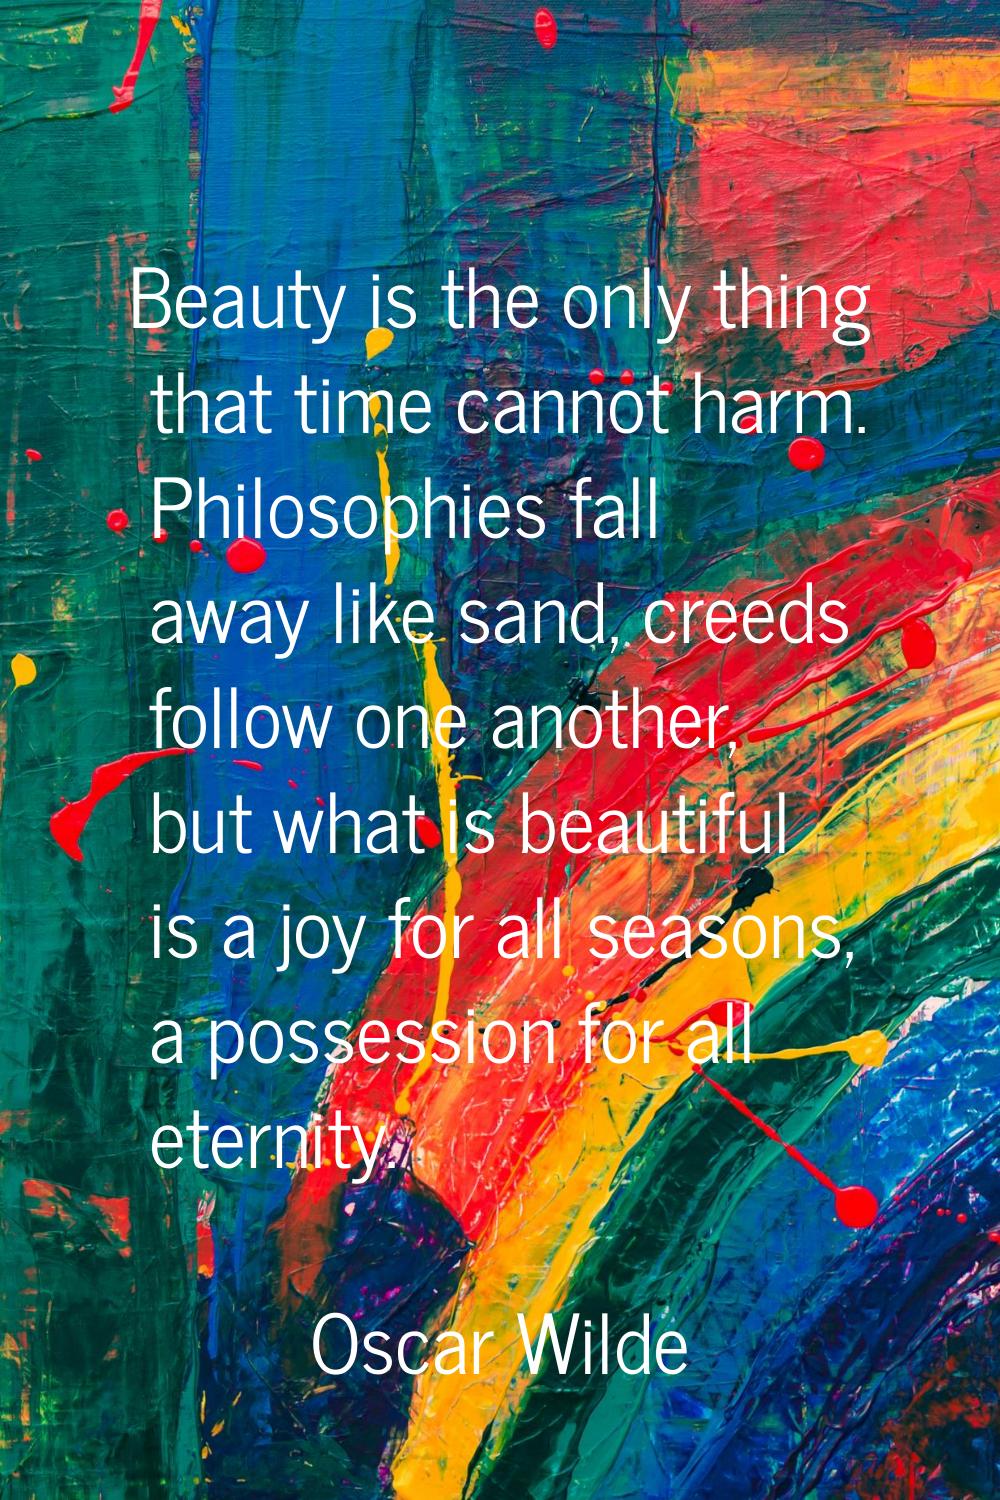 Beauty is the only thing that time cannot harm. Philosophies fall away like sand, creeds follow one